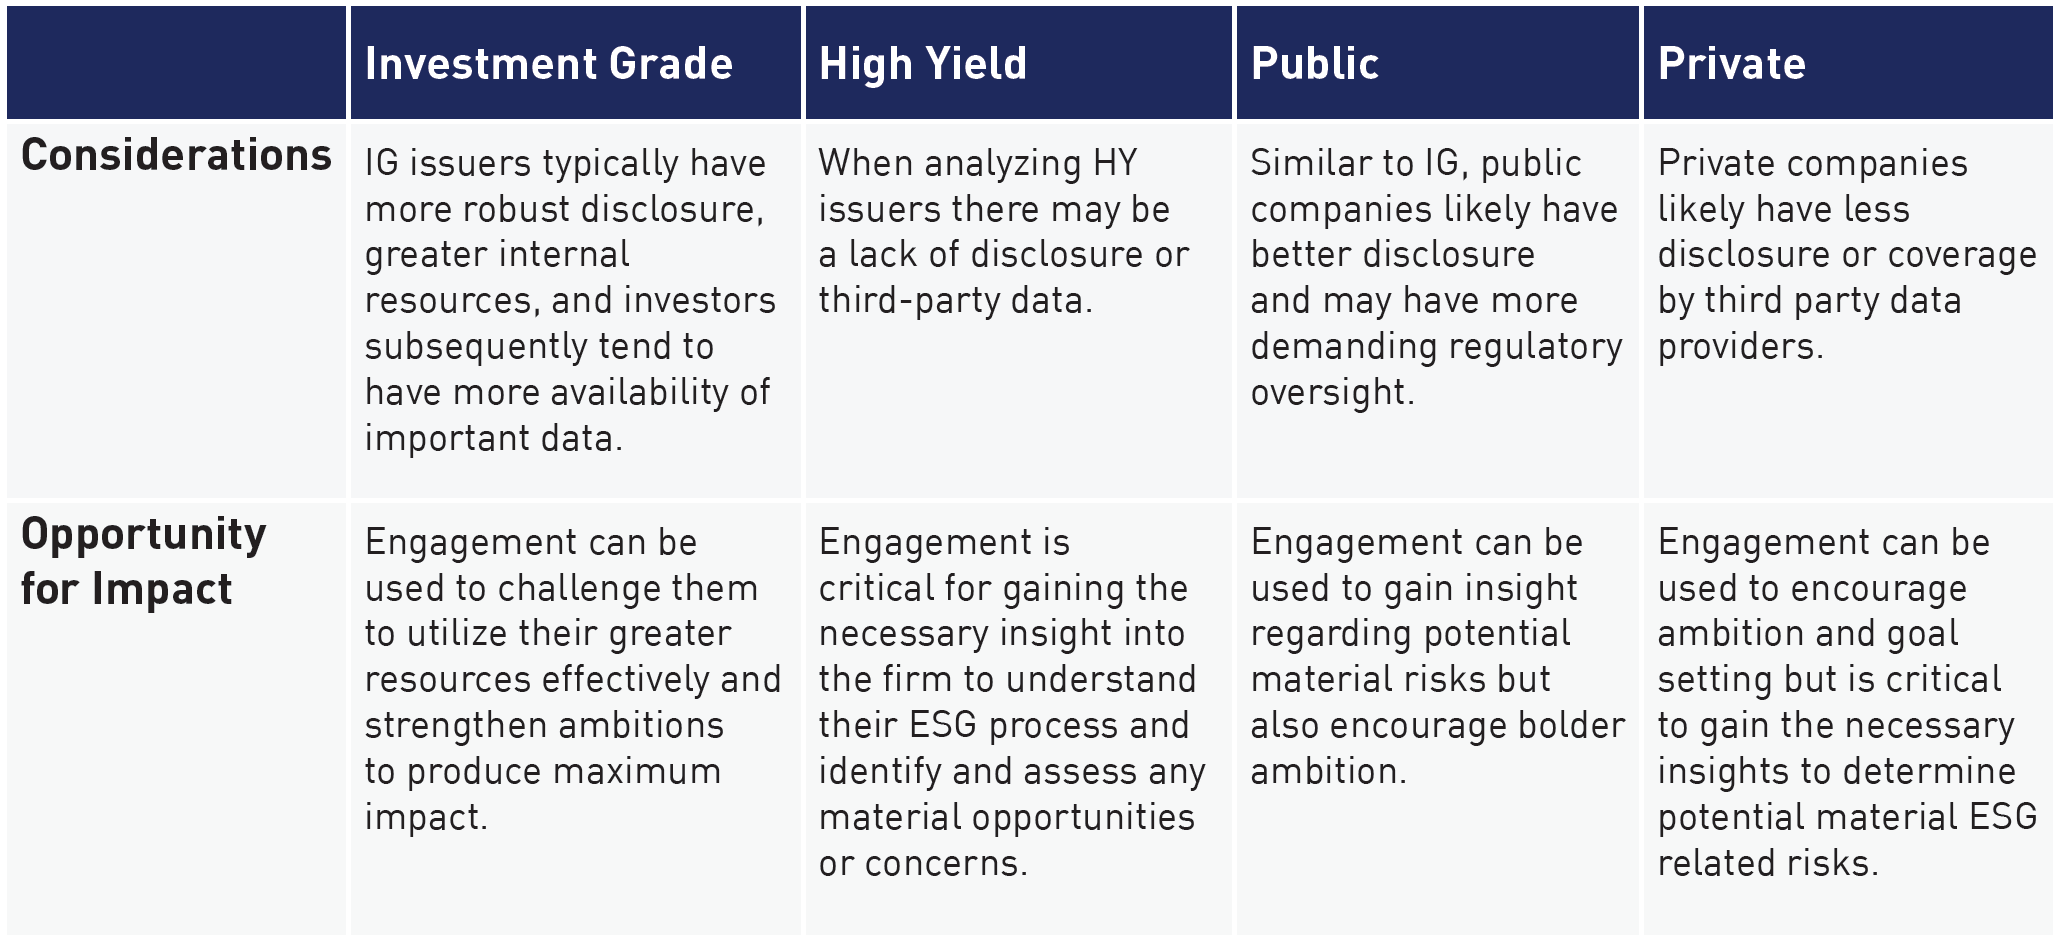 Engagement with different types of issuers